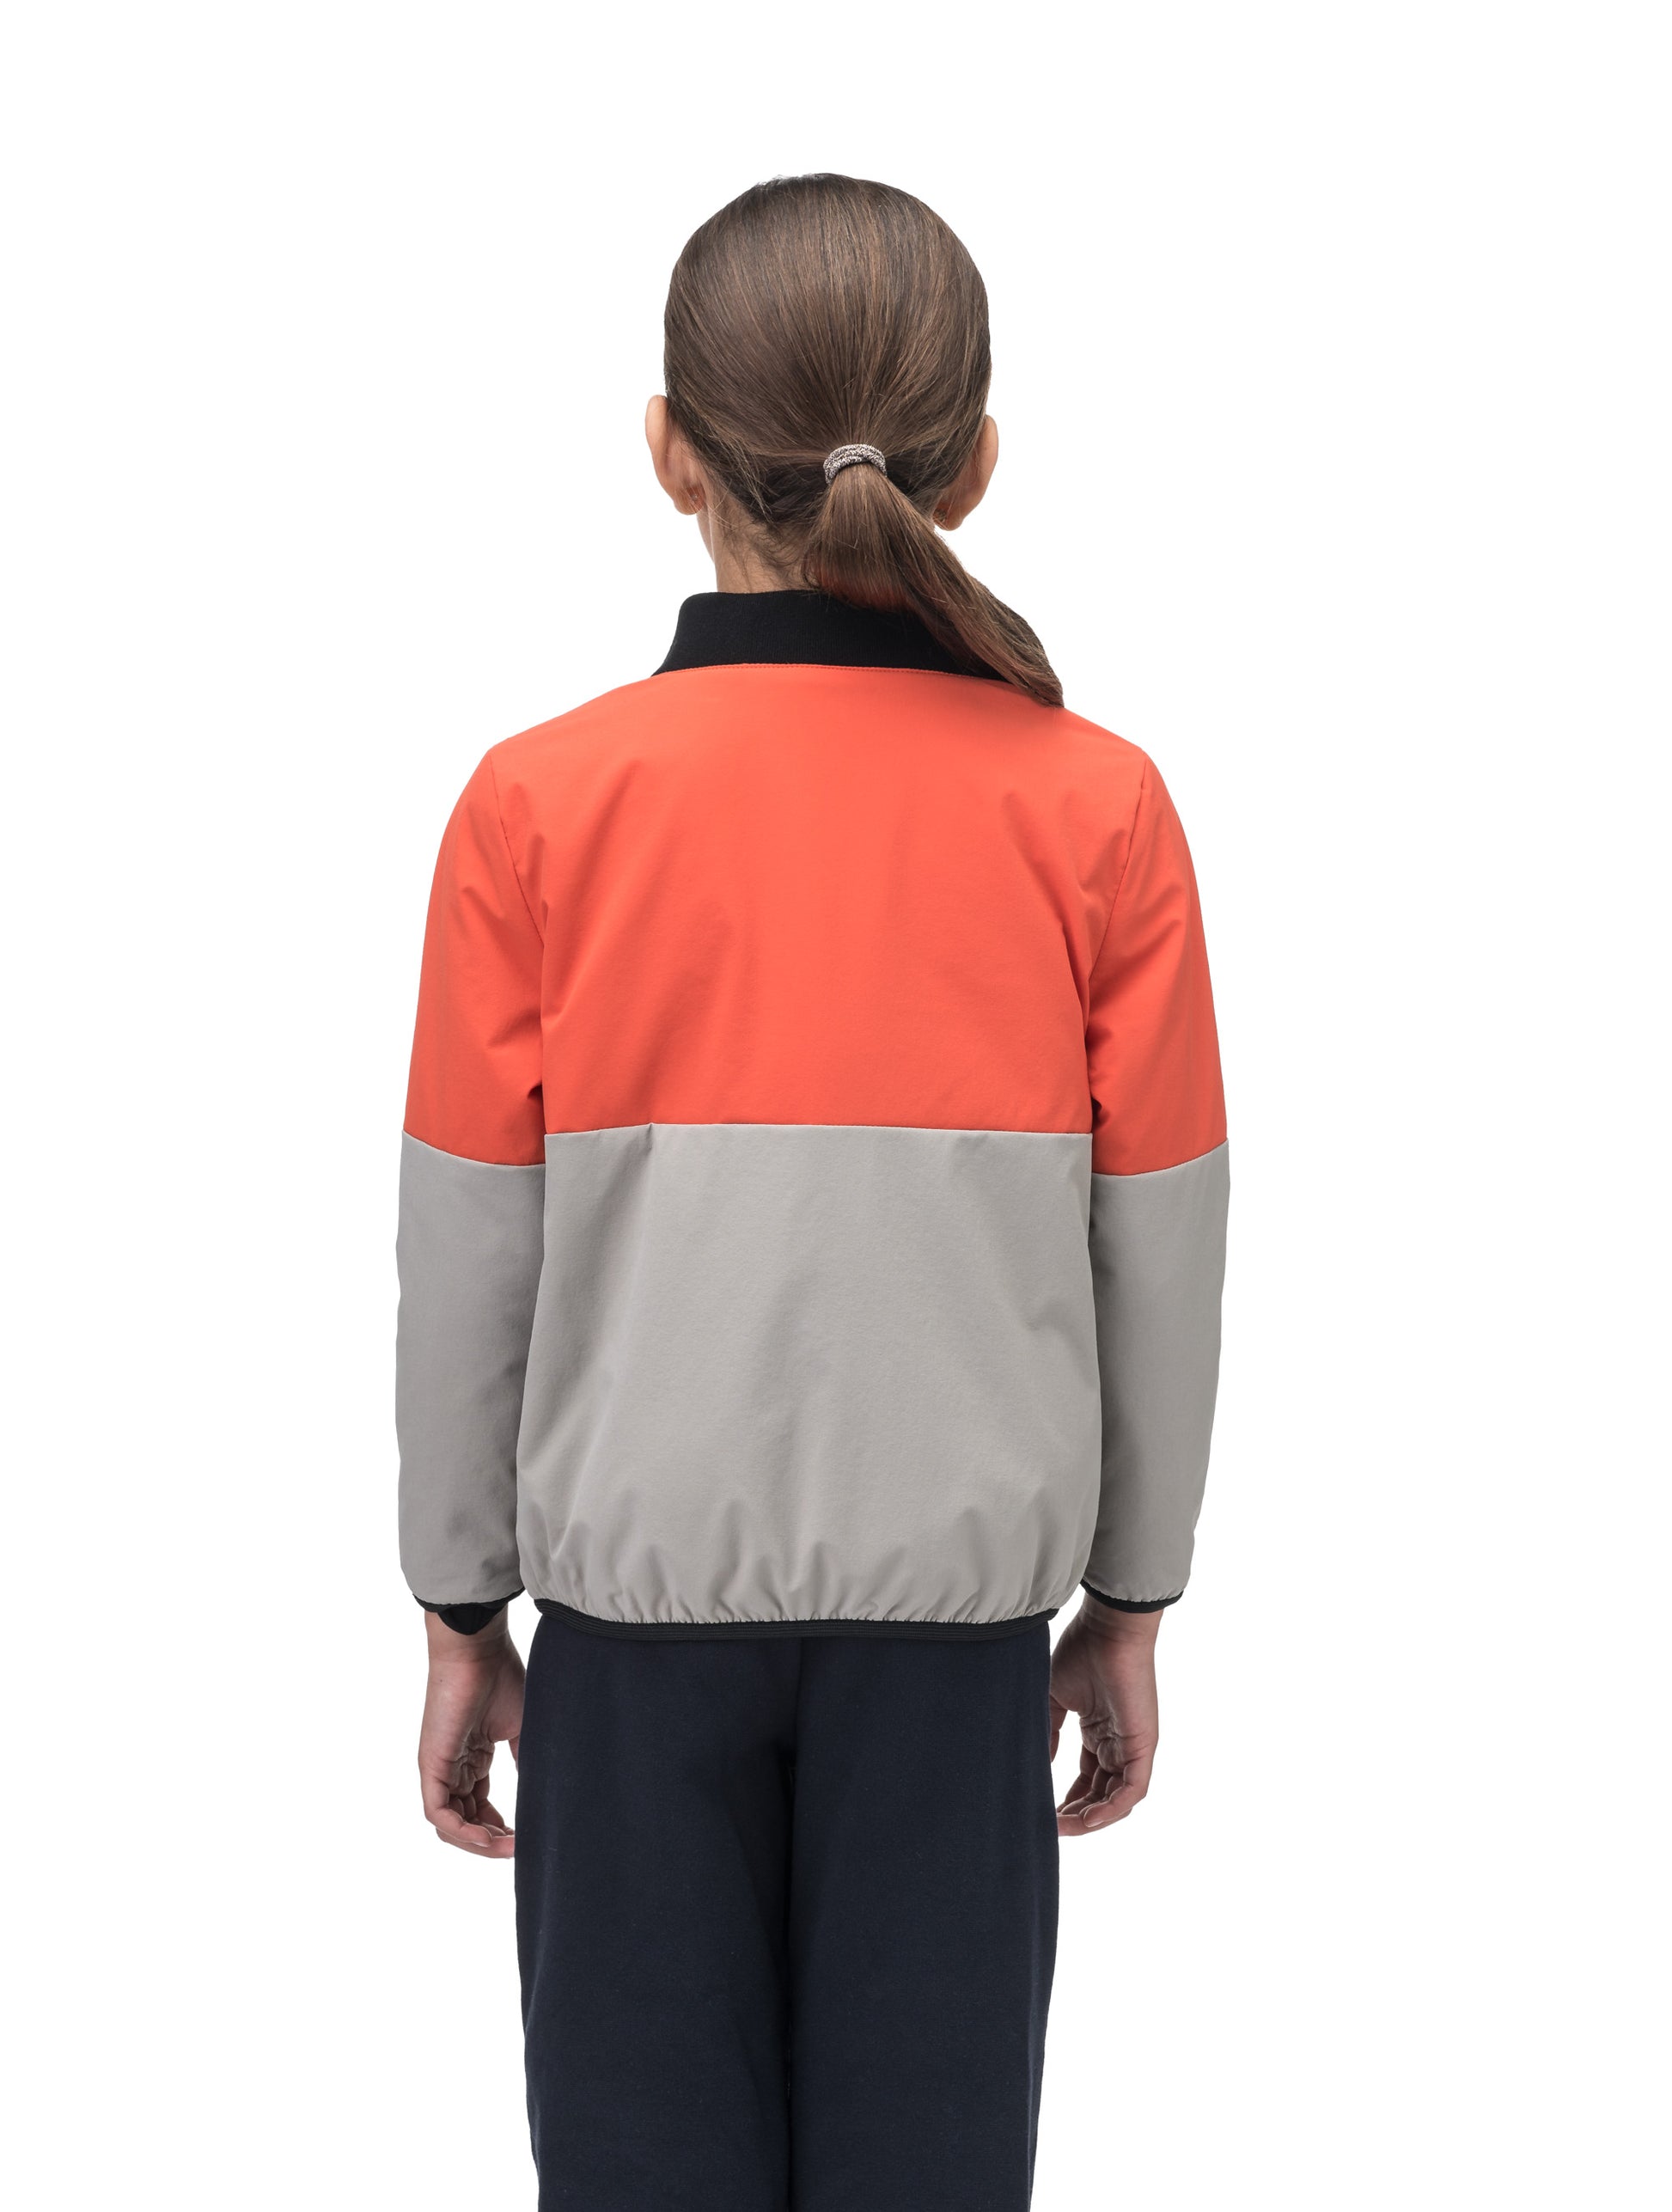 Little Ursa Kids Mid Layer Jacket in hip length, Primaloft Gold Insulation Active, ribbed collar, and two-way front zipper, in Terracotta